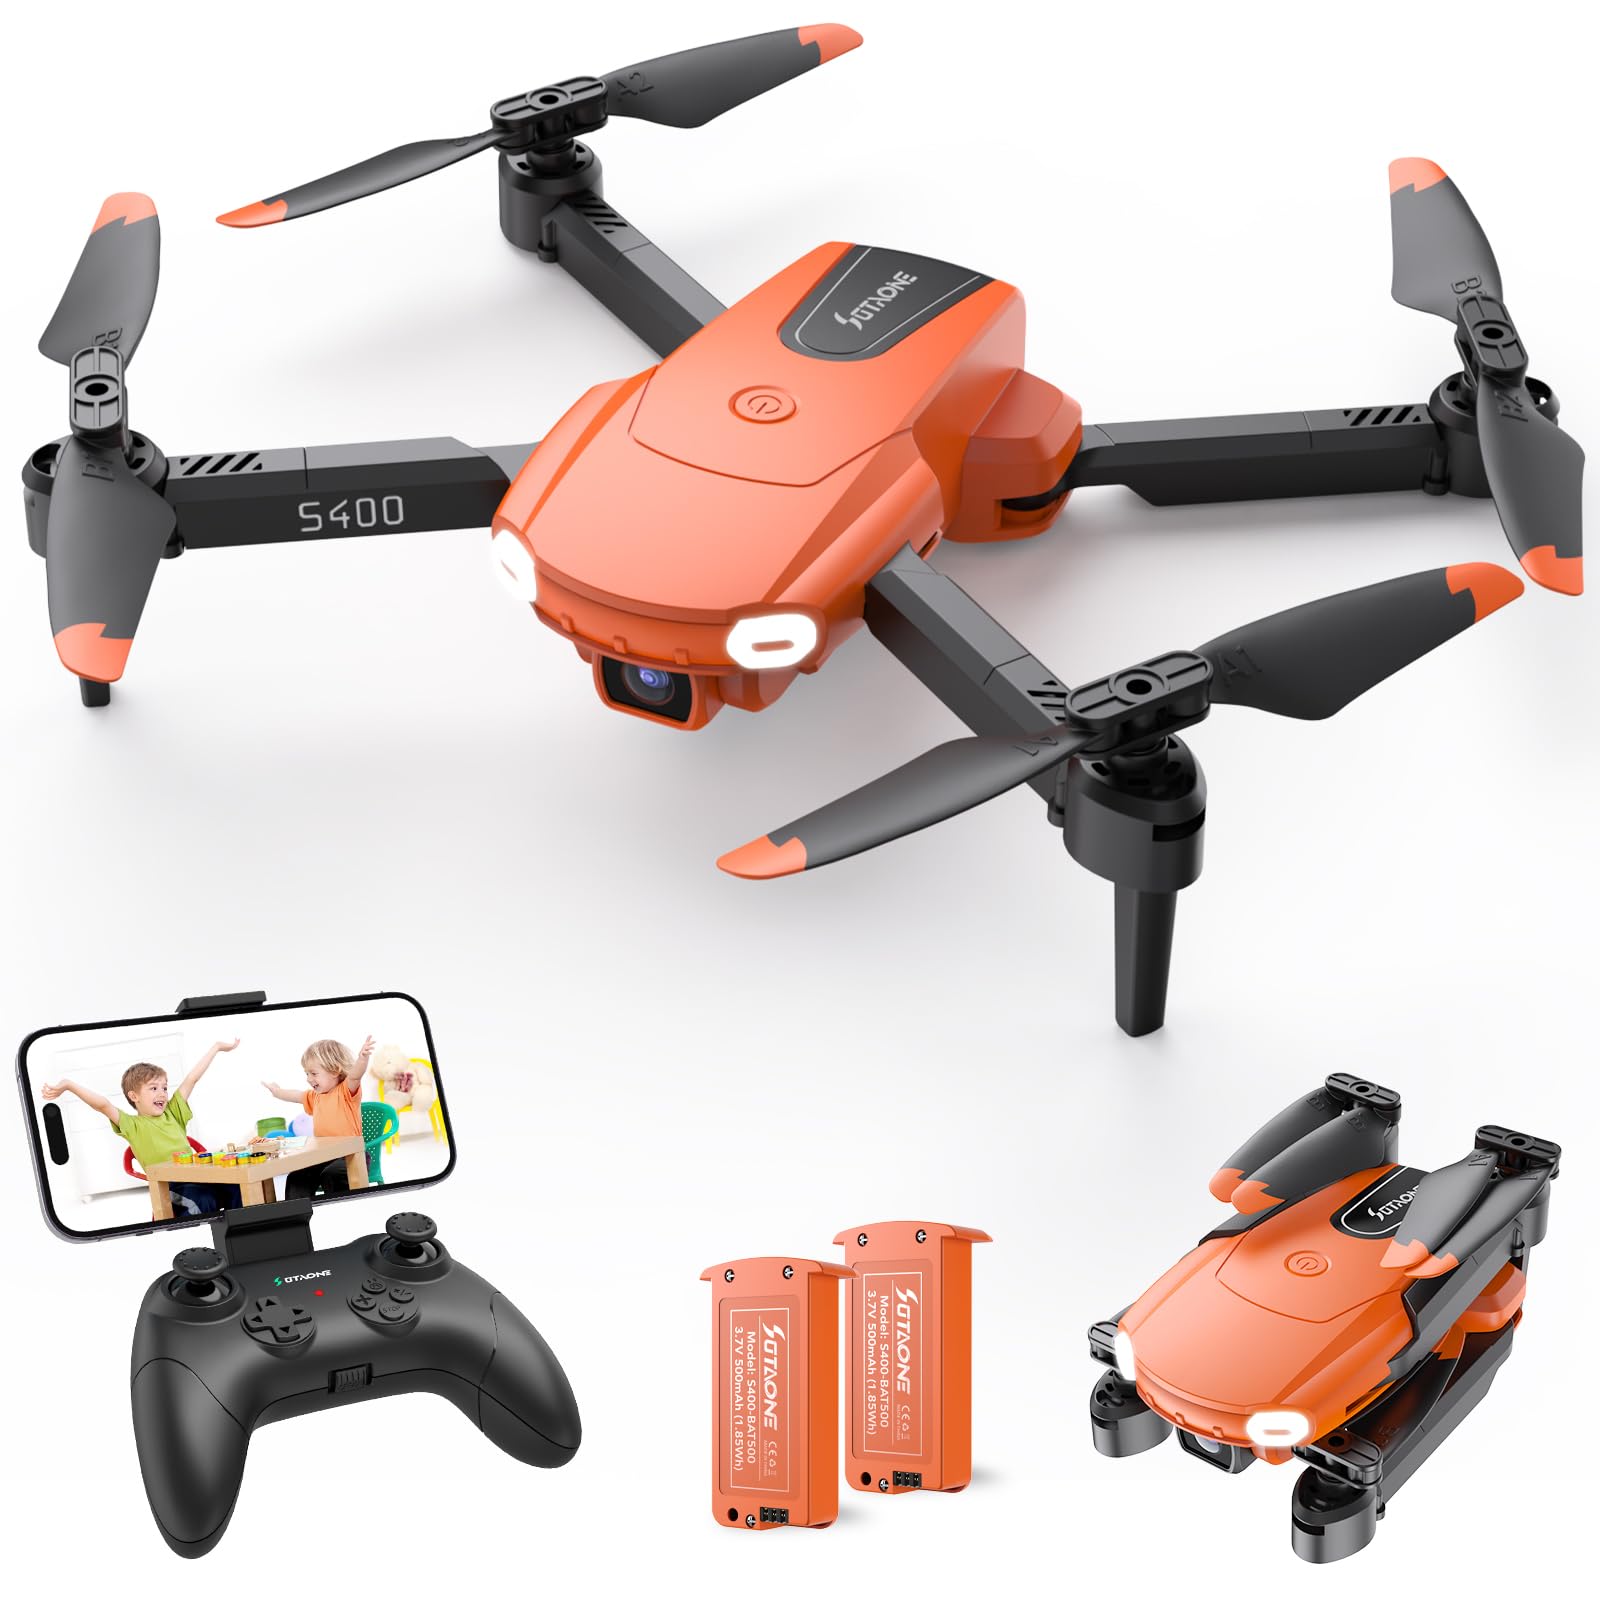 SOTAONE S400 Drone with Camera for Adults Kids, 1080P HD Foldable Mini Drones for Boys Girls, Remote Control Helicopter Toys Gifts with Auto-hovering, One Key Start, 3 Speeds, 2 Batteries, Carry Case